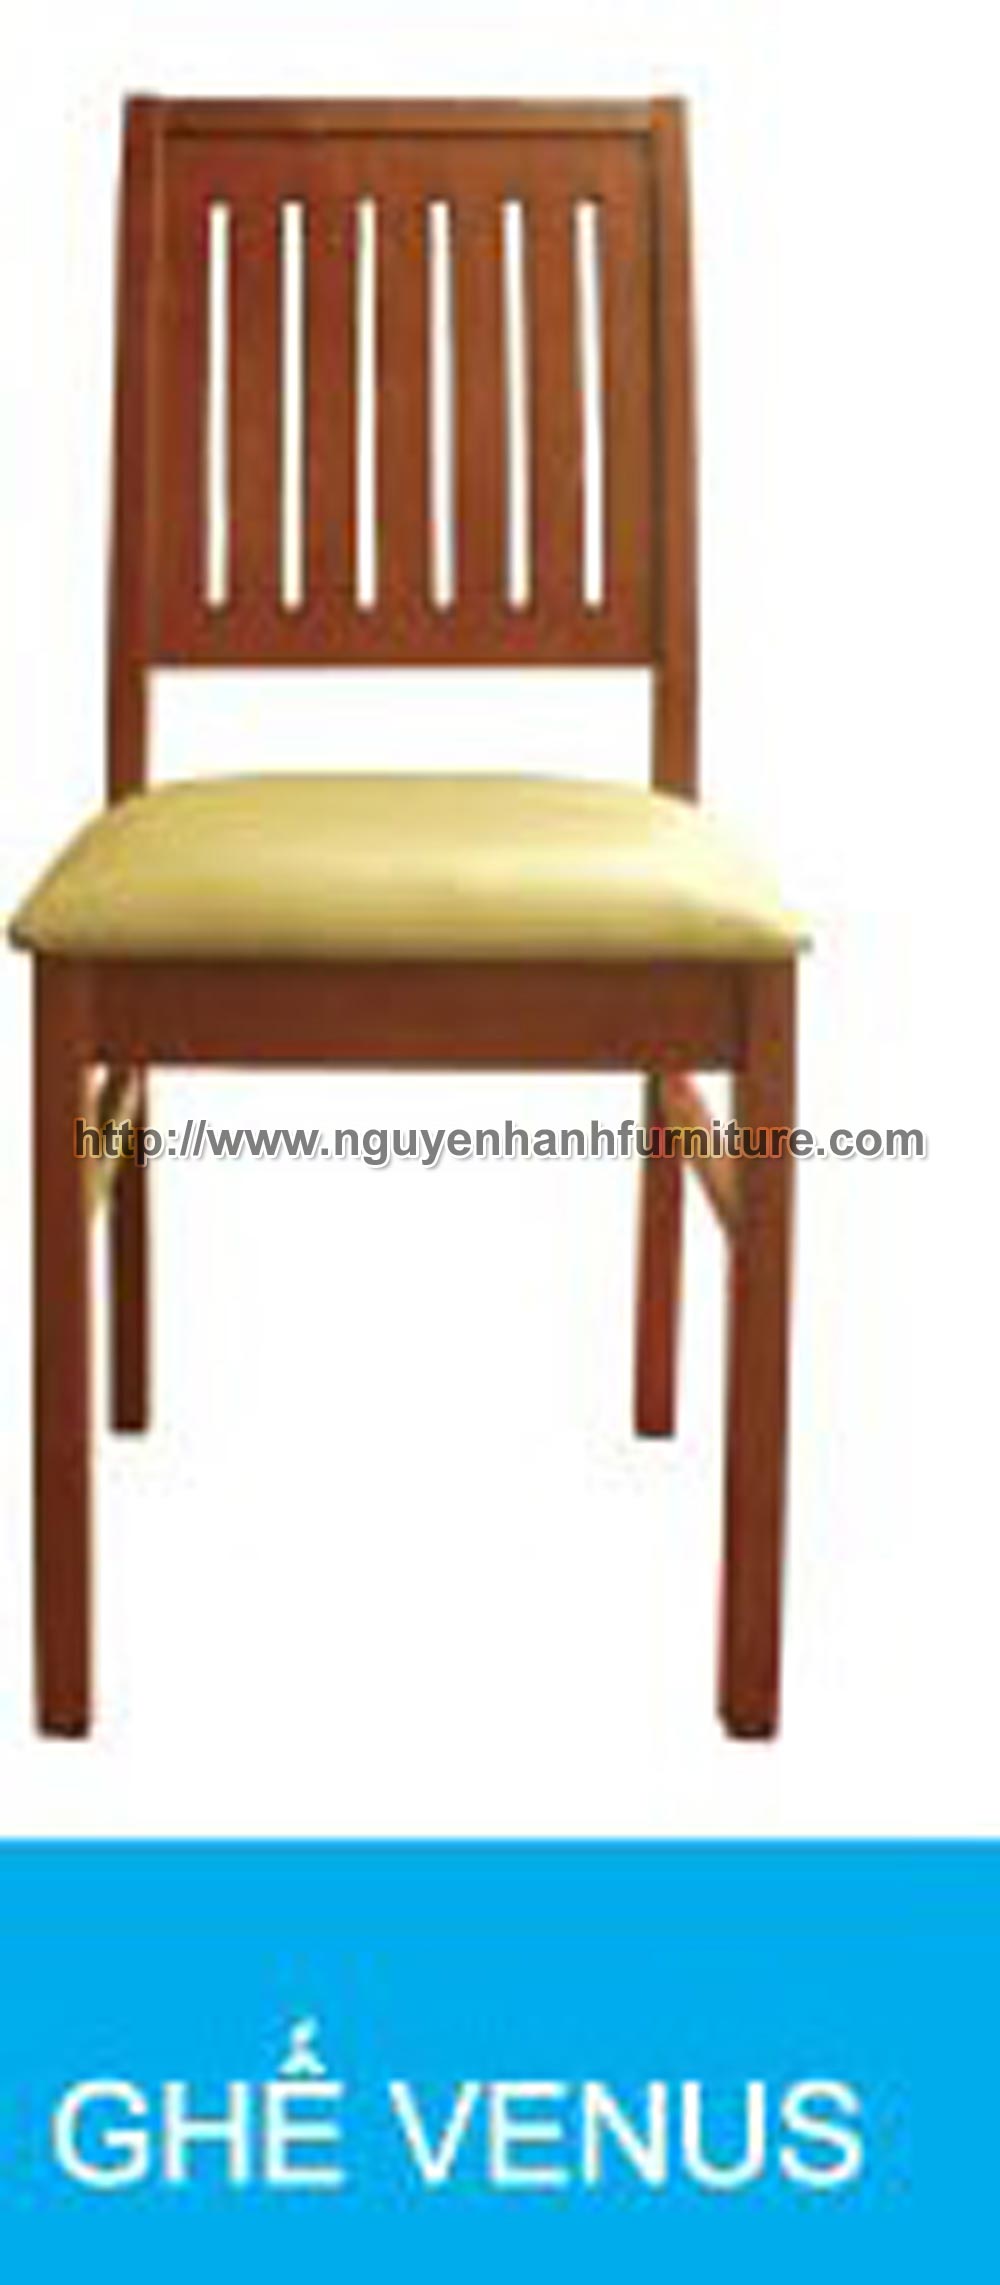 Name product: Venus chair with mattressed surface- Dimensions:  - Description: Rubber wood, the mattress